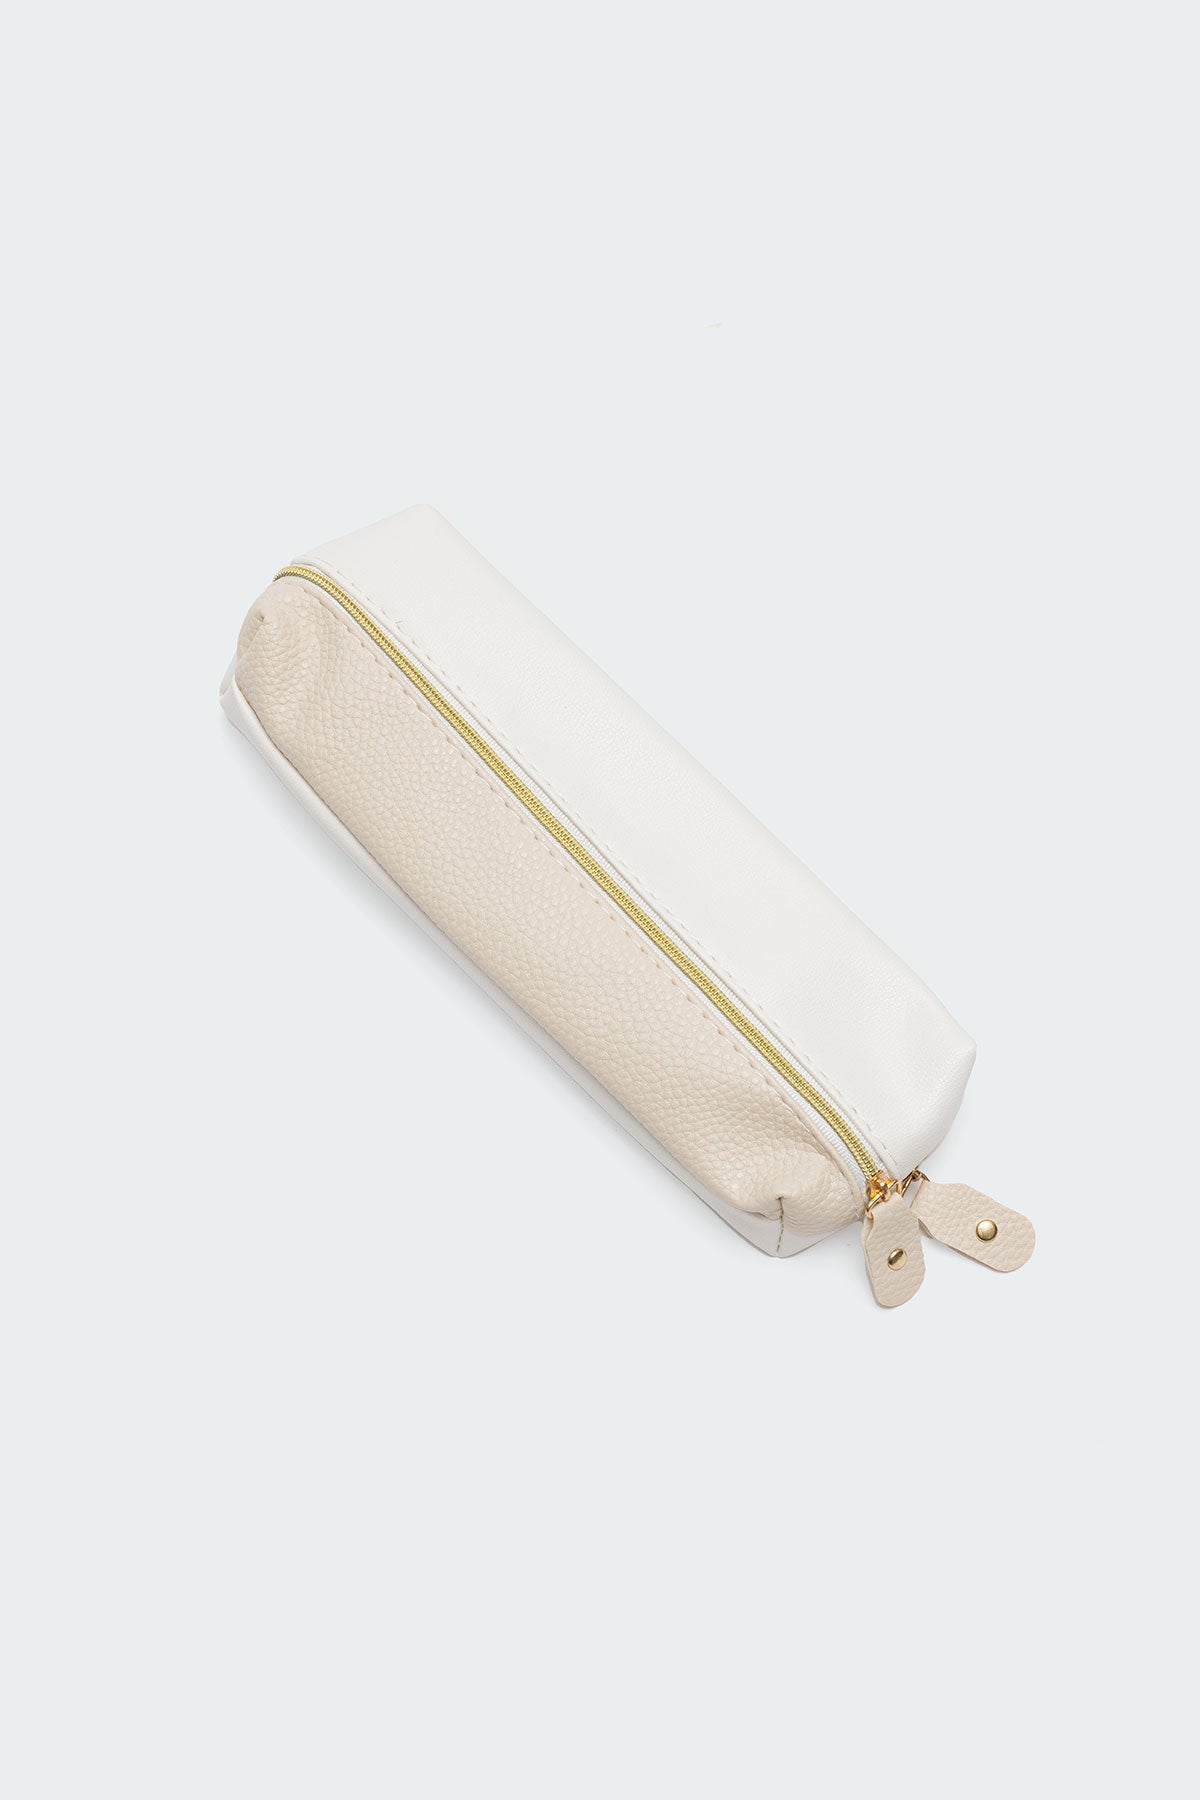 Two Toned Faux Leather Pencil Case